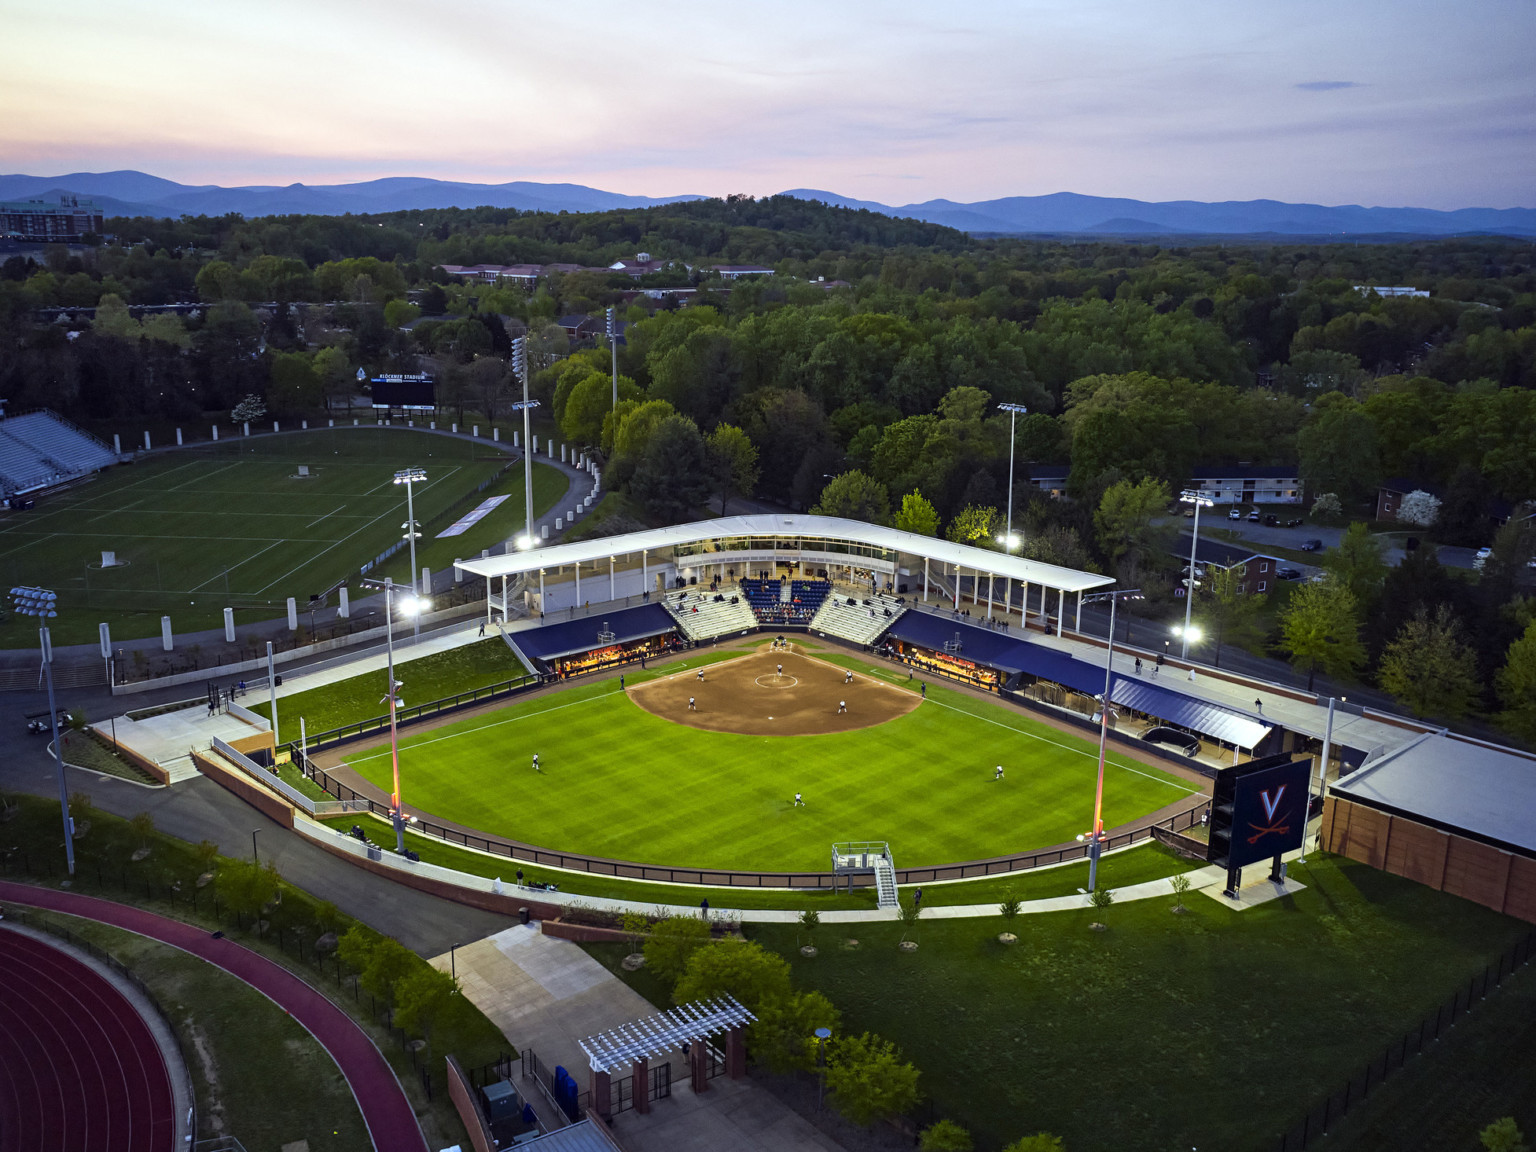 University of Virginia Softball stadium aerial view at lit up at dusk, surrounded by trees and view of Blue Ridge Mountains